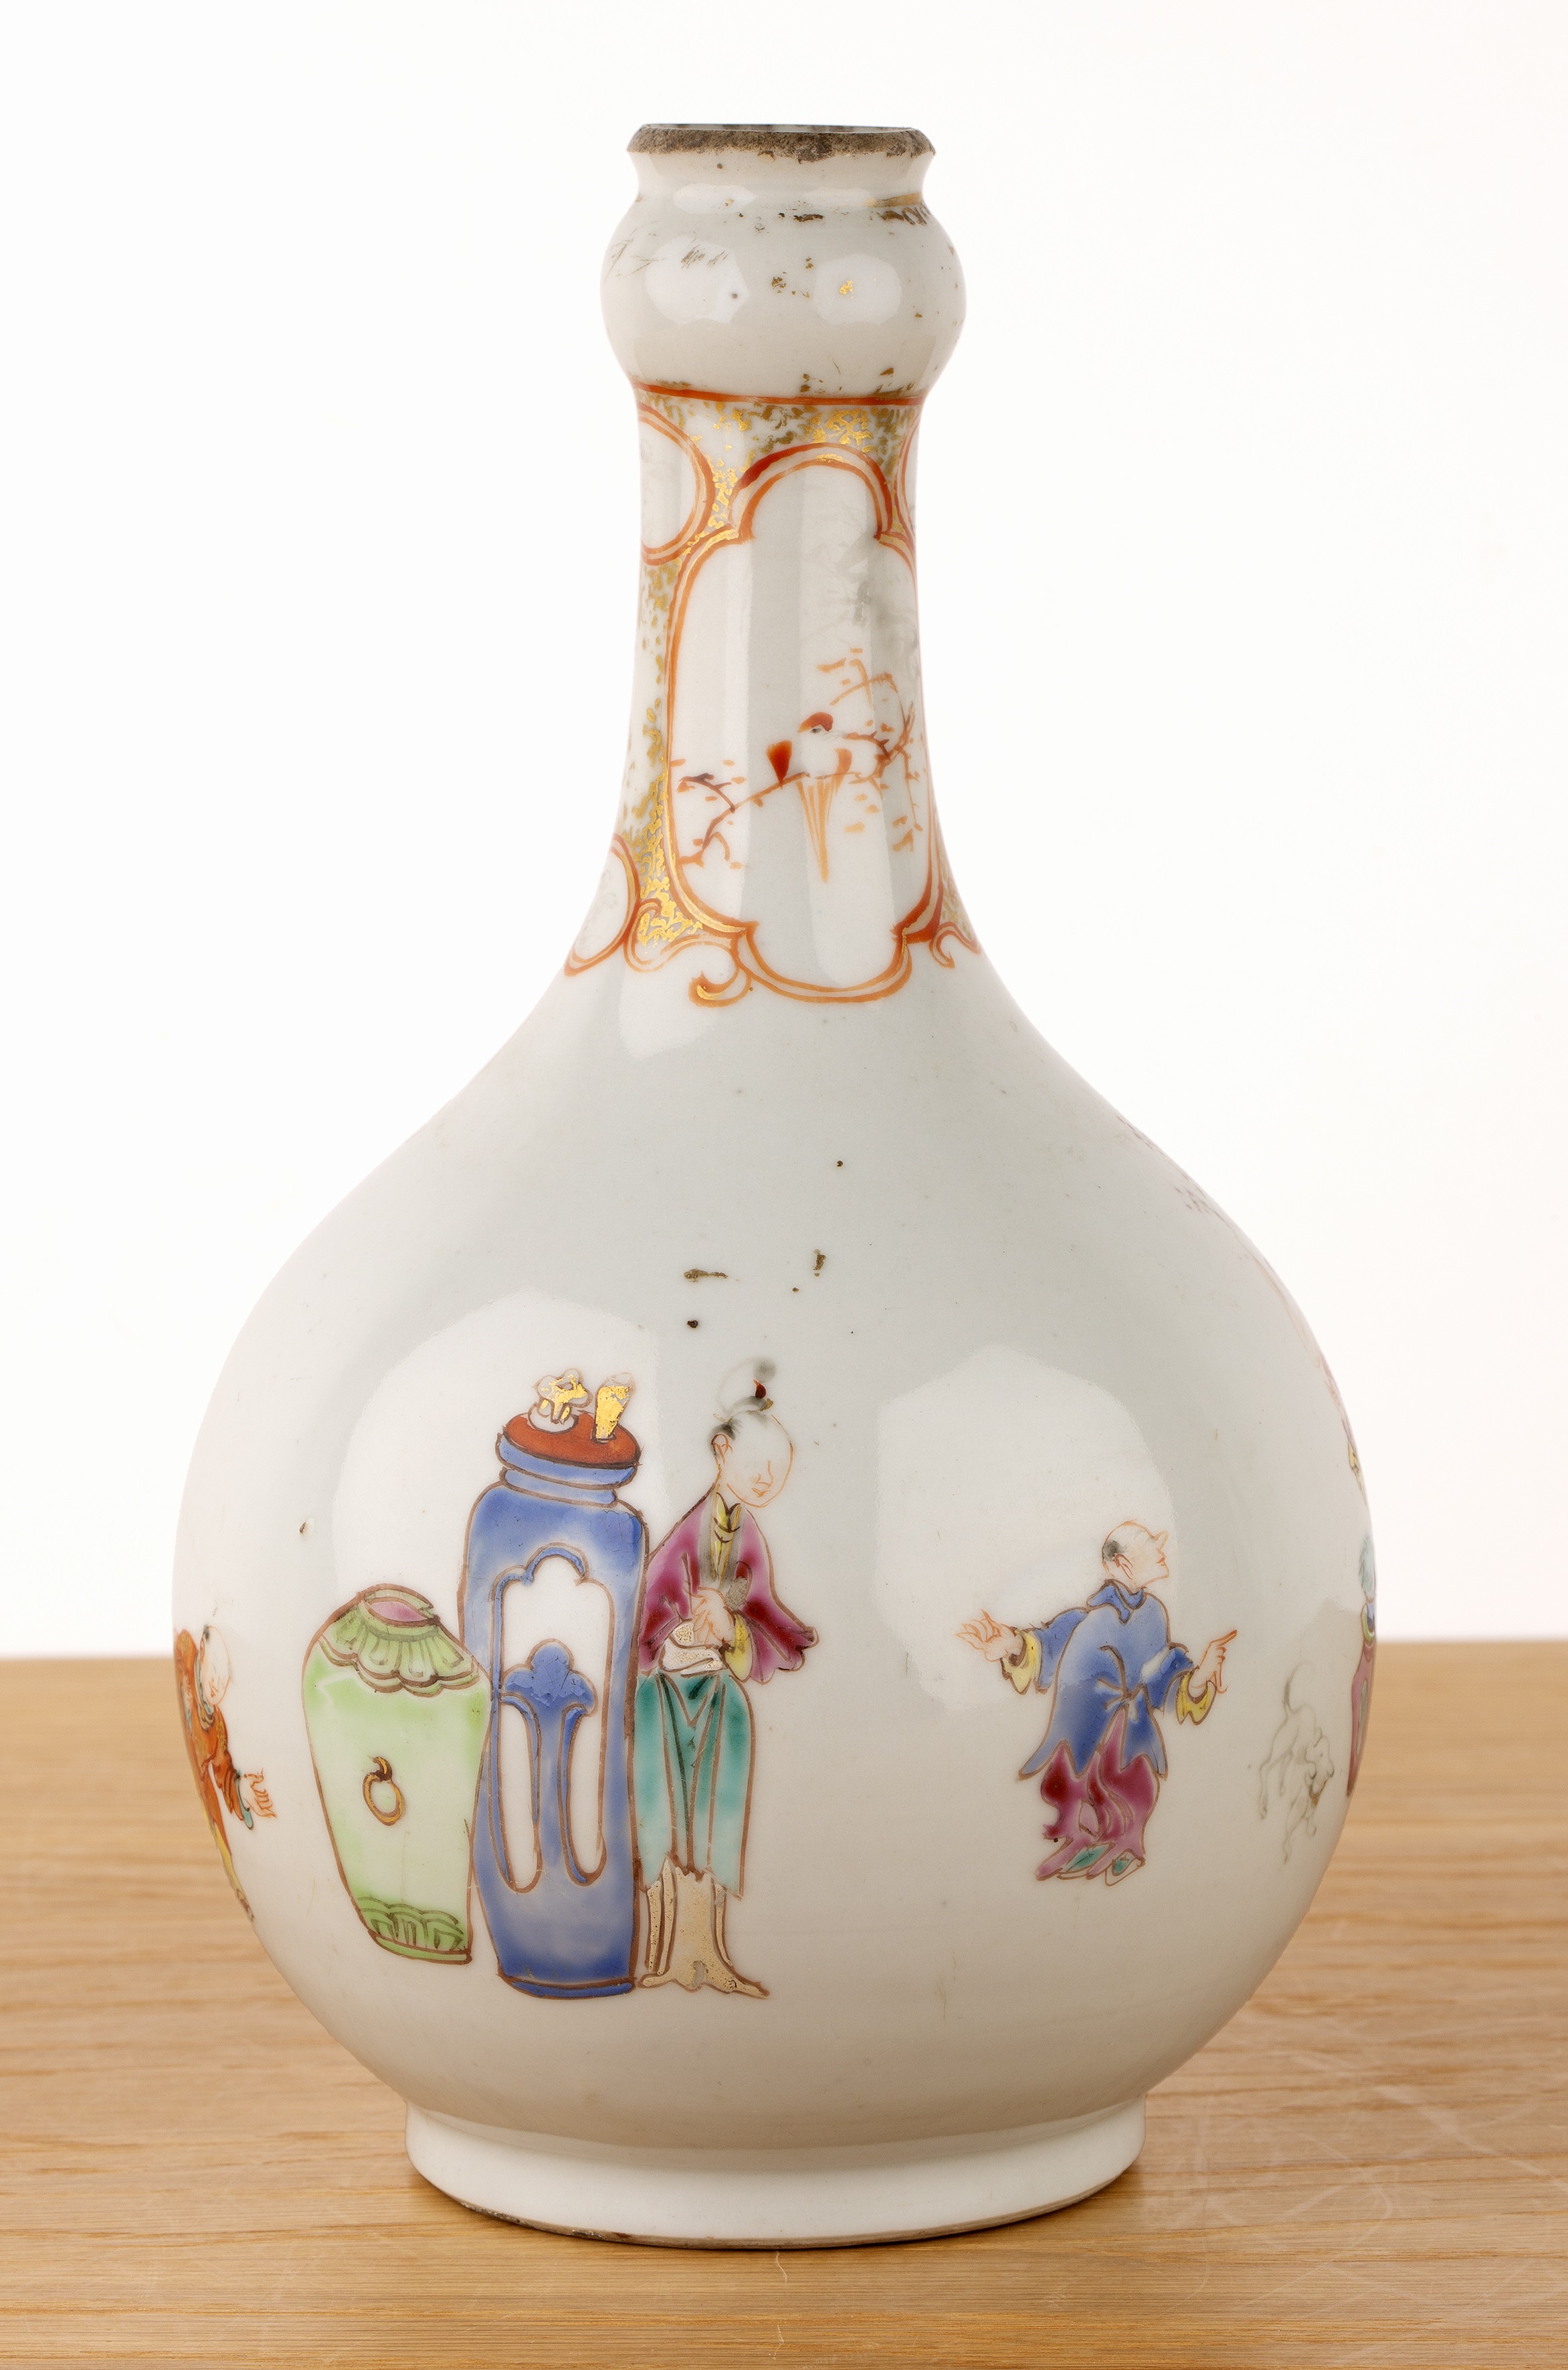 Famille rose porcelain guglet vase Chinese, late 18th Century painted with figures and a dog in an - Image 2 of 5